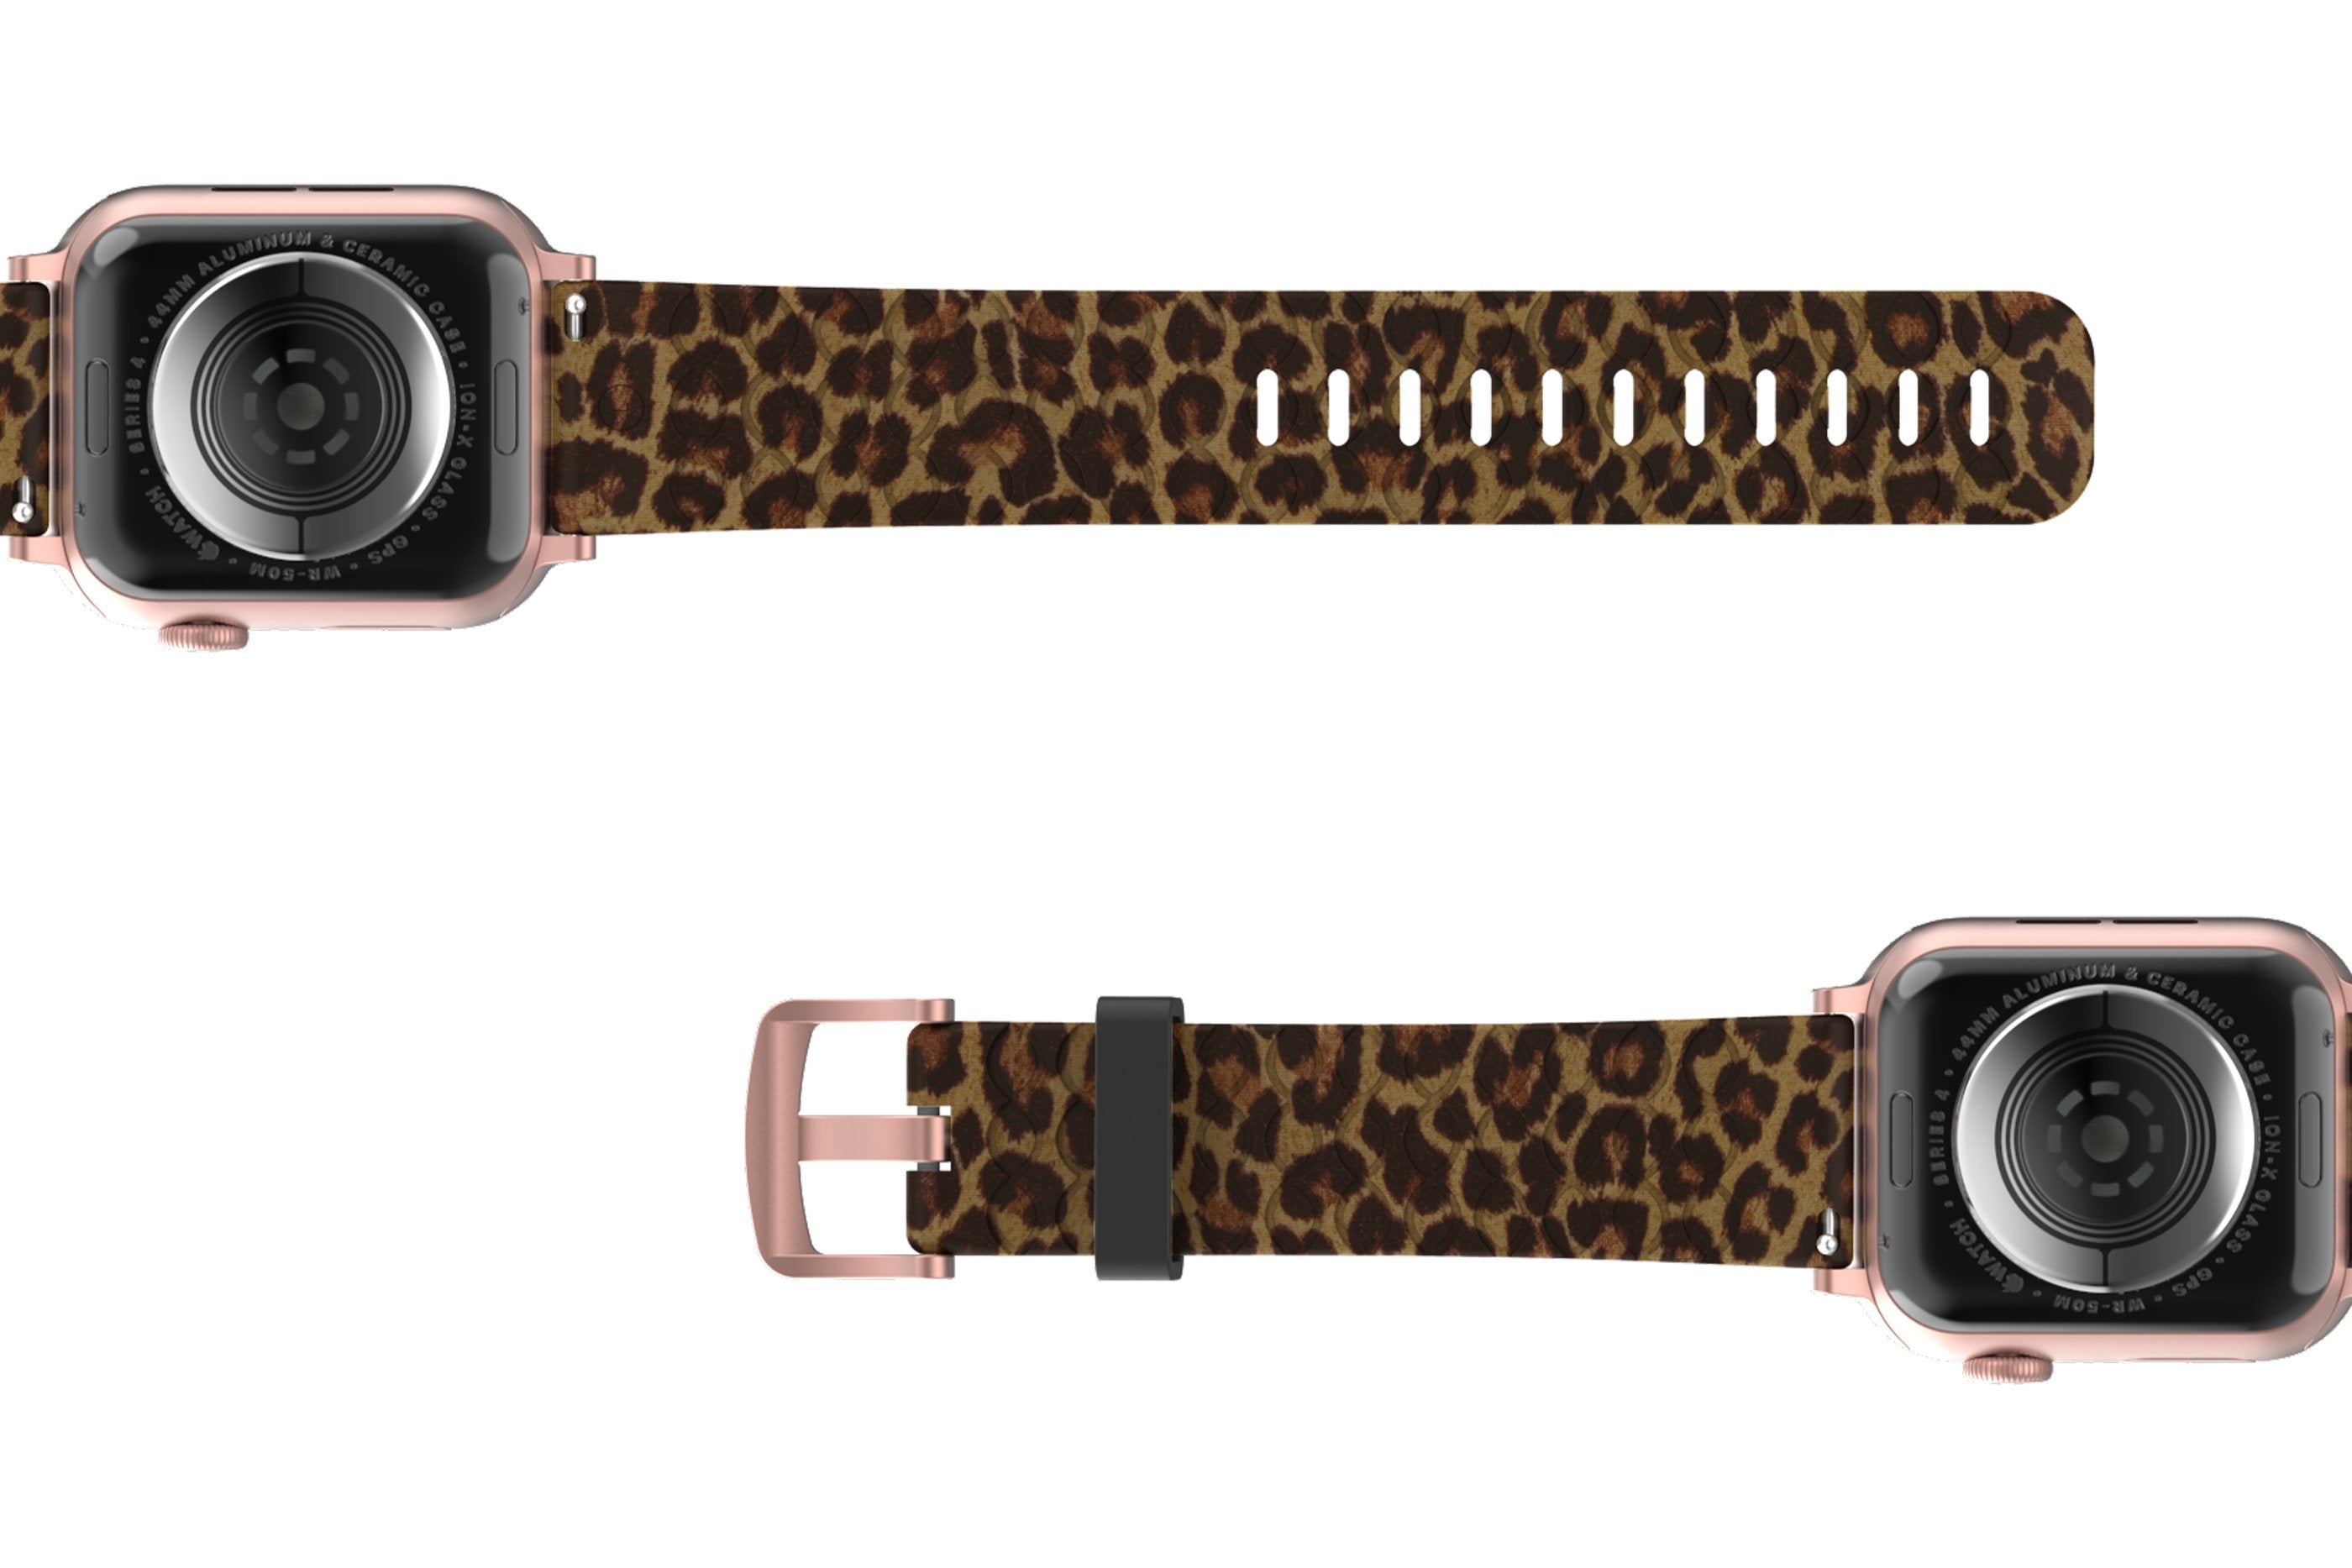 Leopard Apple Watch Band with rose gold hardware viewed bottom up